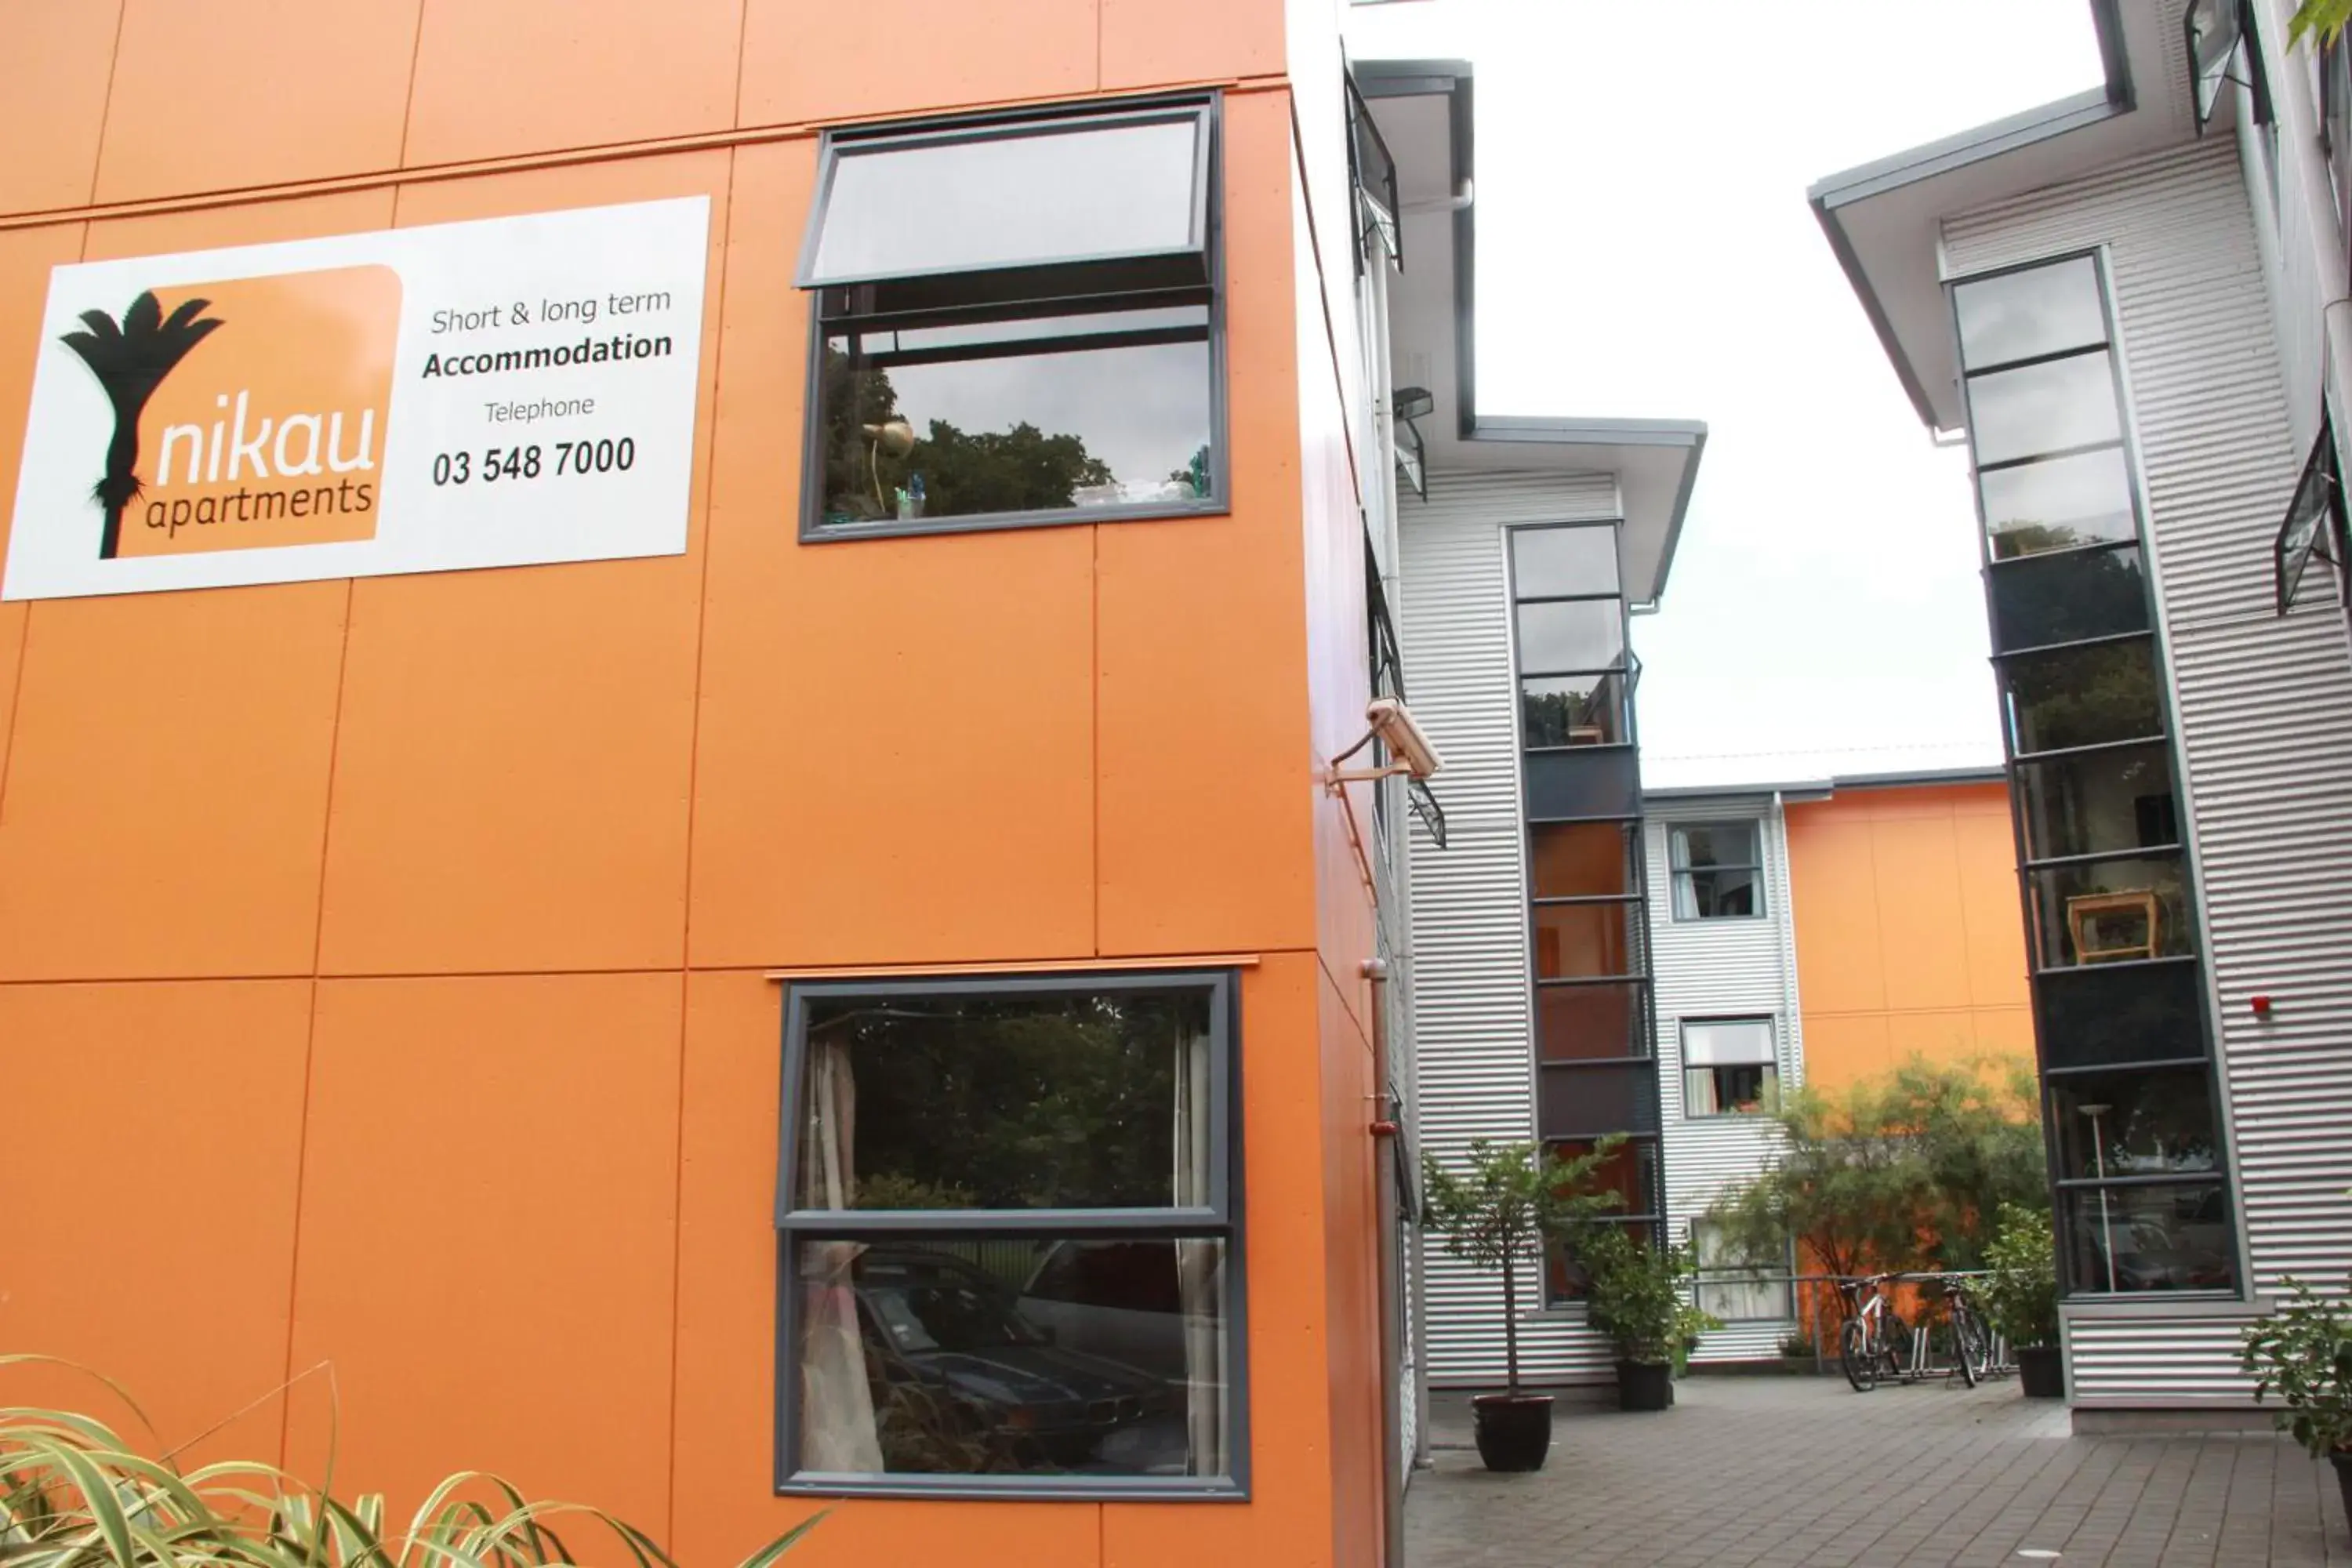 Property Building in Nikau Apartments